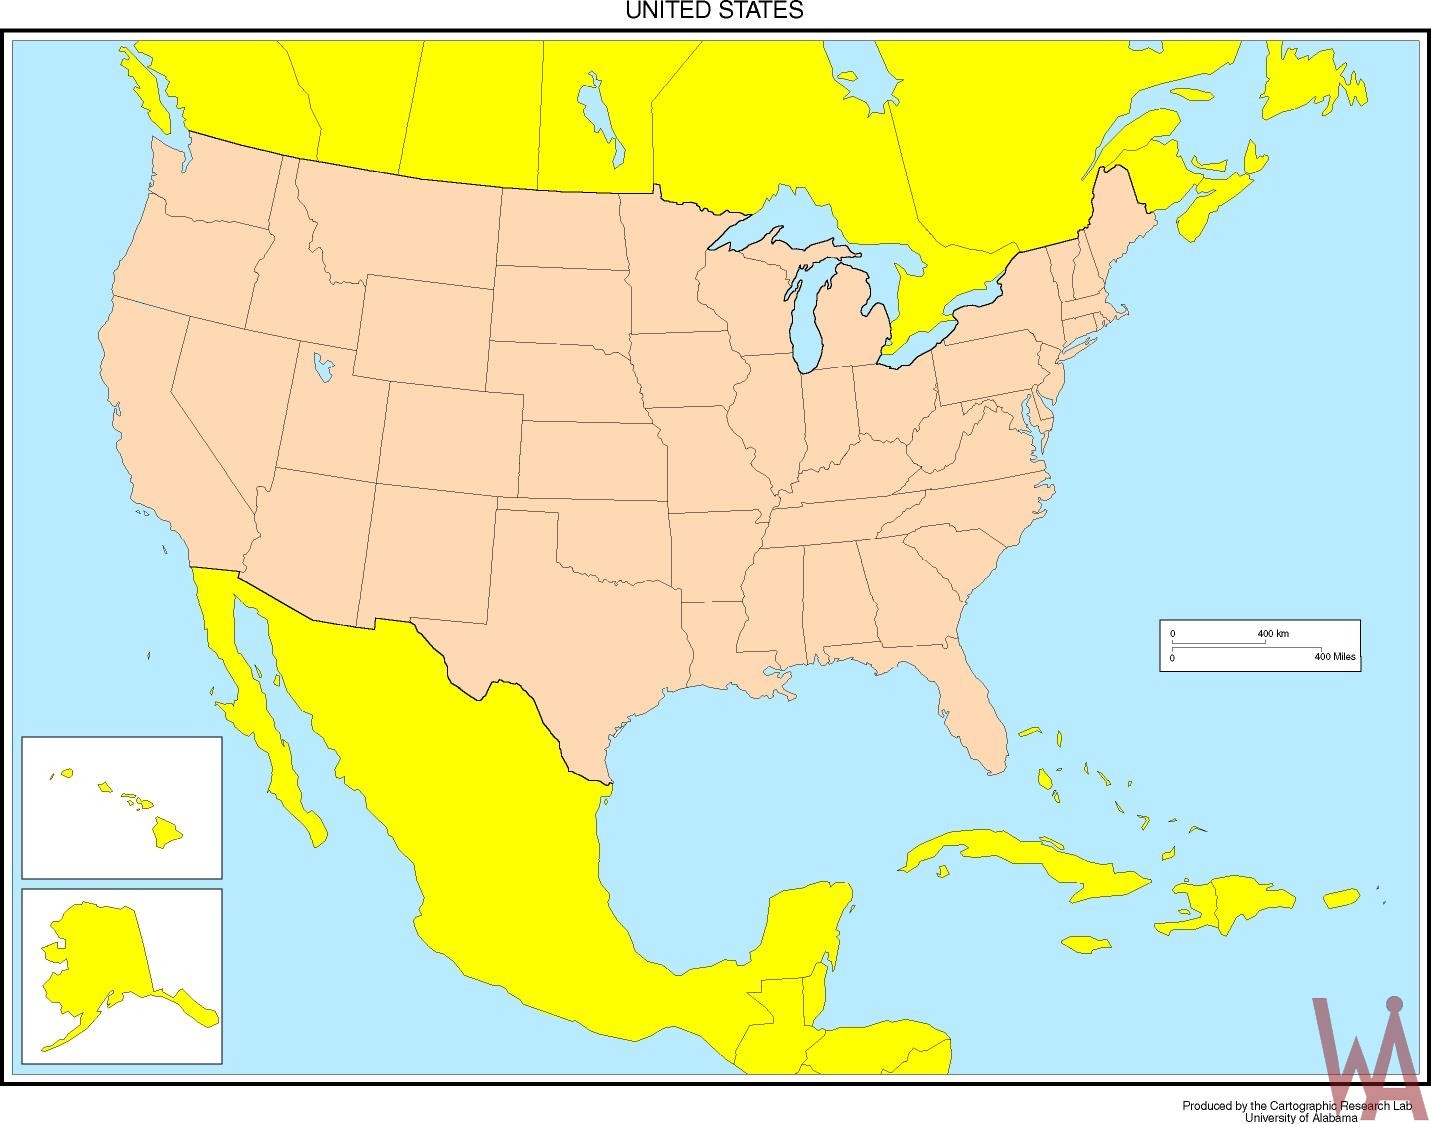 blank map of united states and mexico Blank Outline Map Of The Usa With Mexico Whatsanswer blank map of united states and mexico